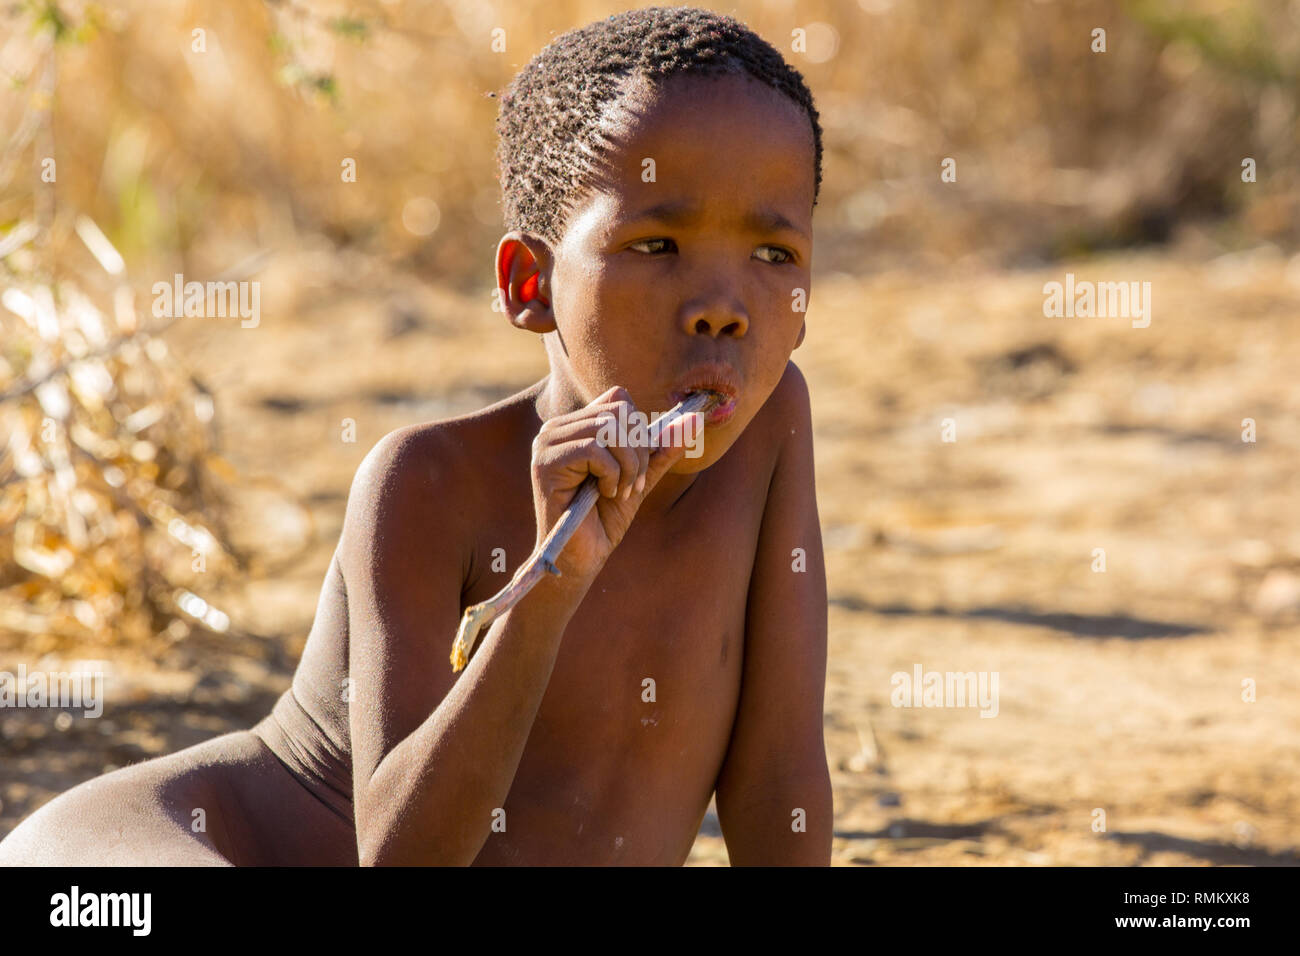 Portrait of a Bushman child. Photographed in Namibia Stock Photo - Alamy